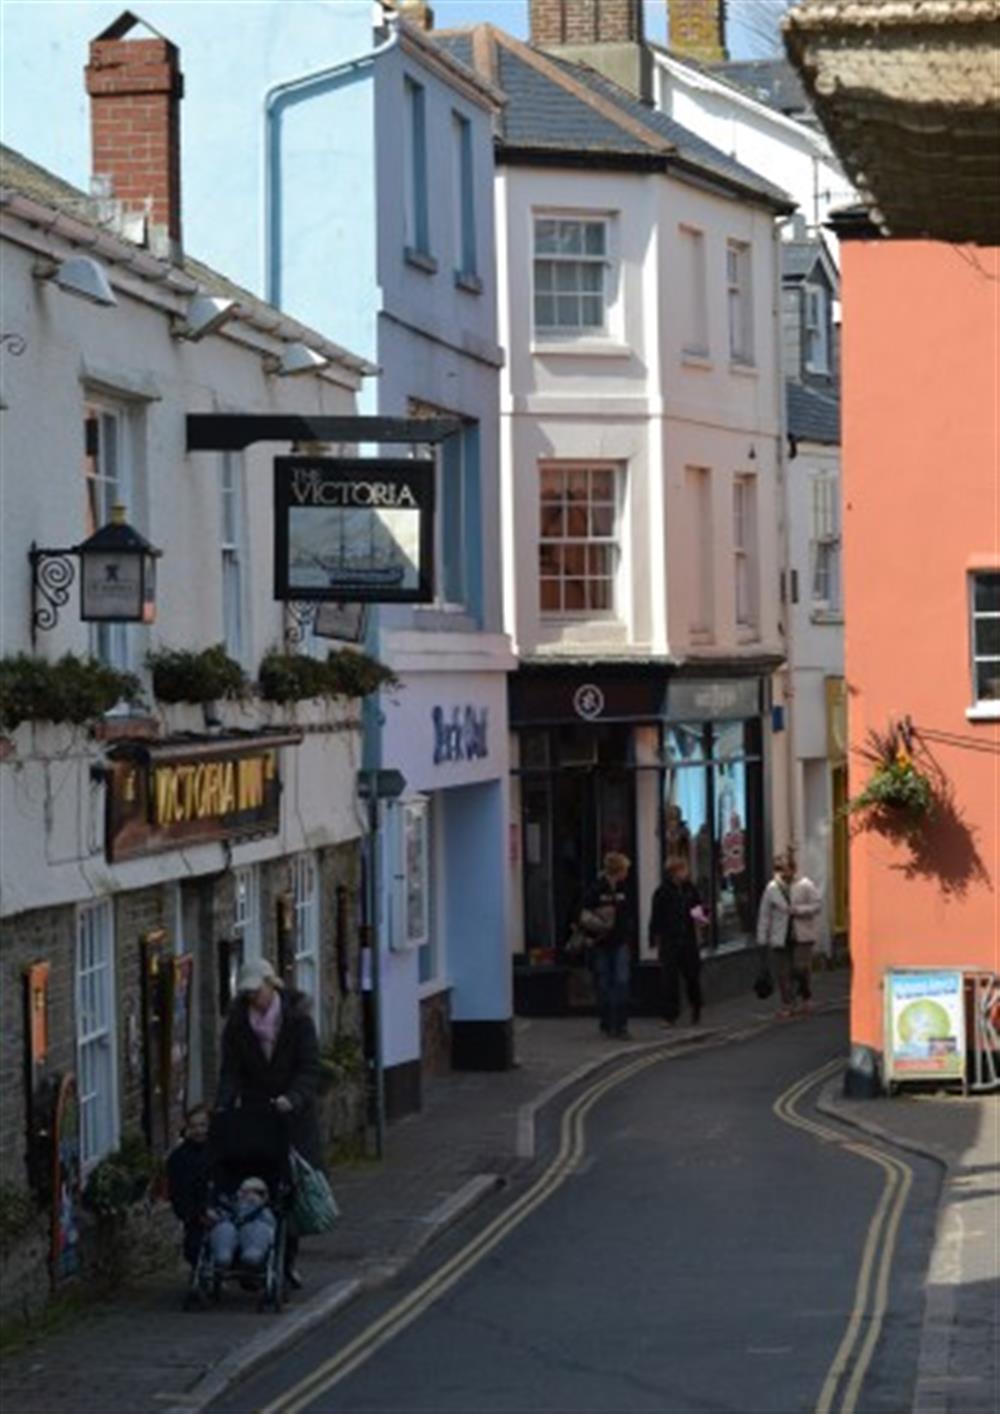 A great selection of pubs. restaurants and shops all within easy walking distance at 4 Island Place in Salcombe